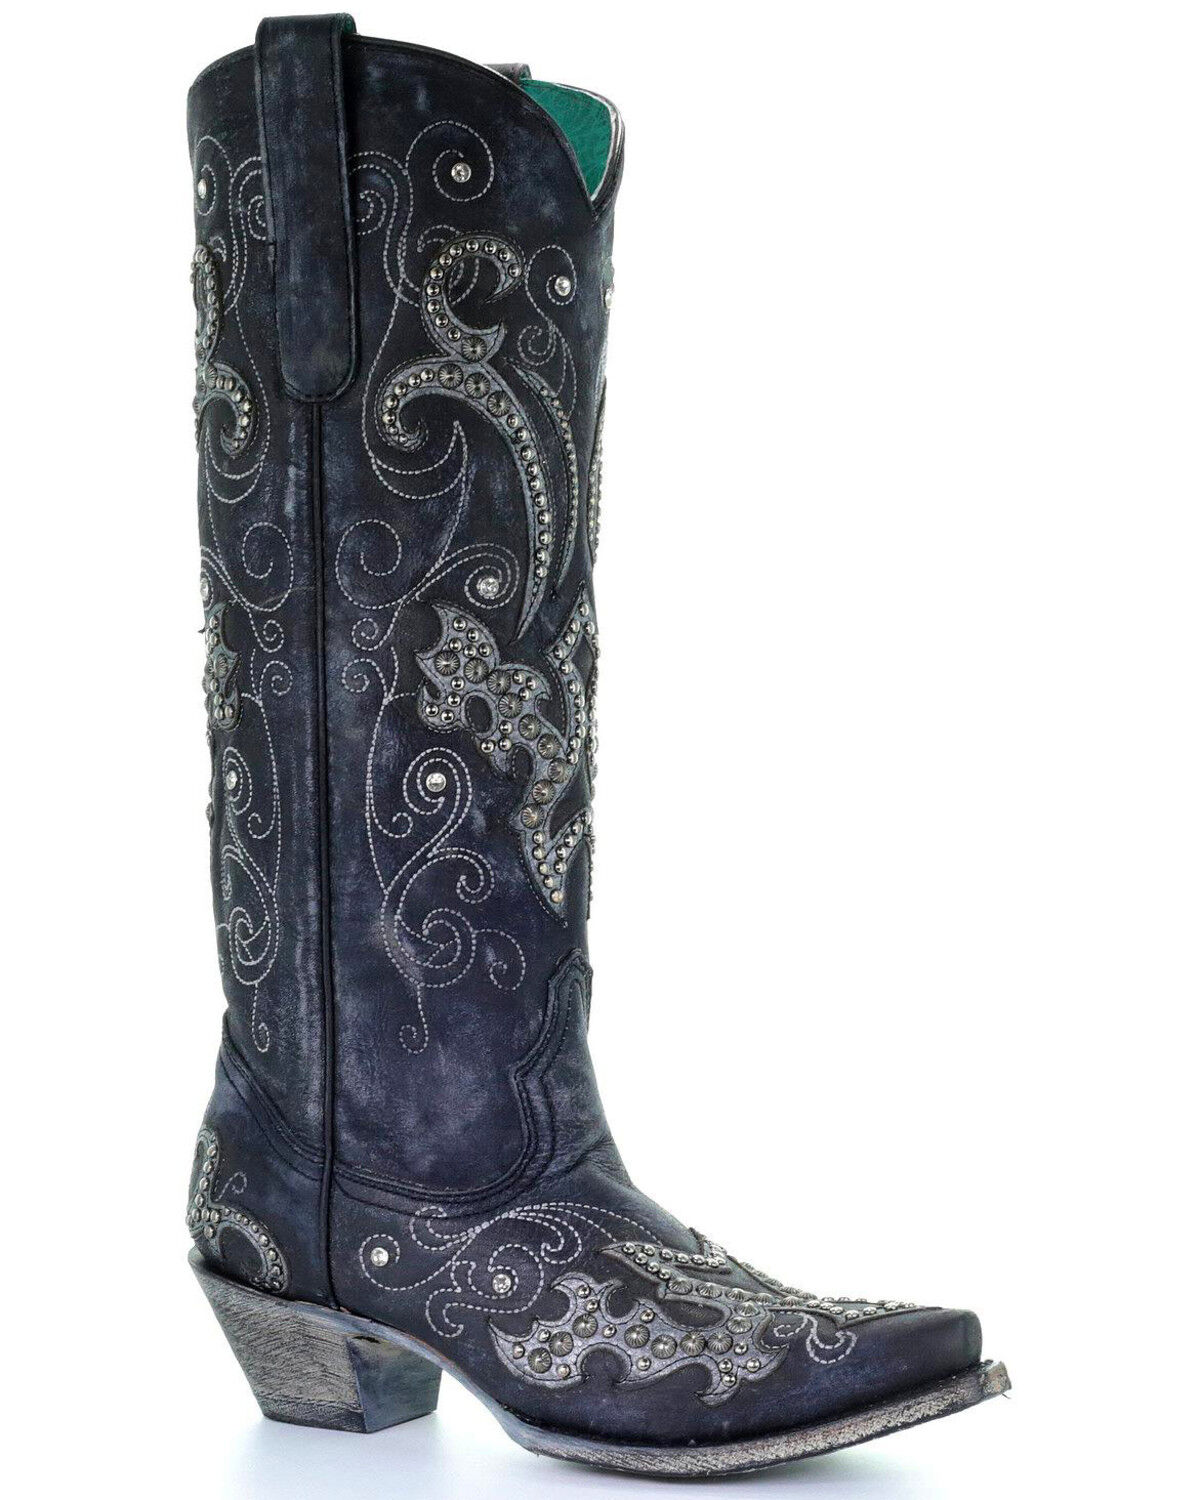 Embellished Cowgirl Boots - Sheplers